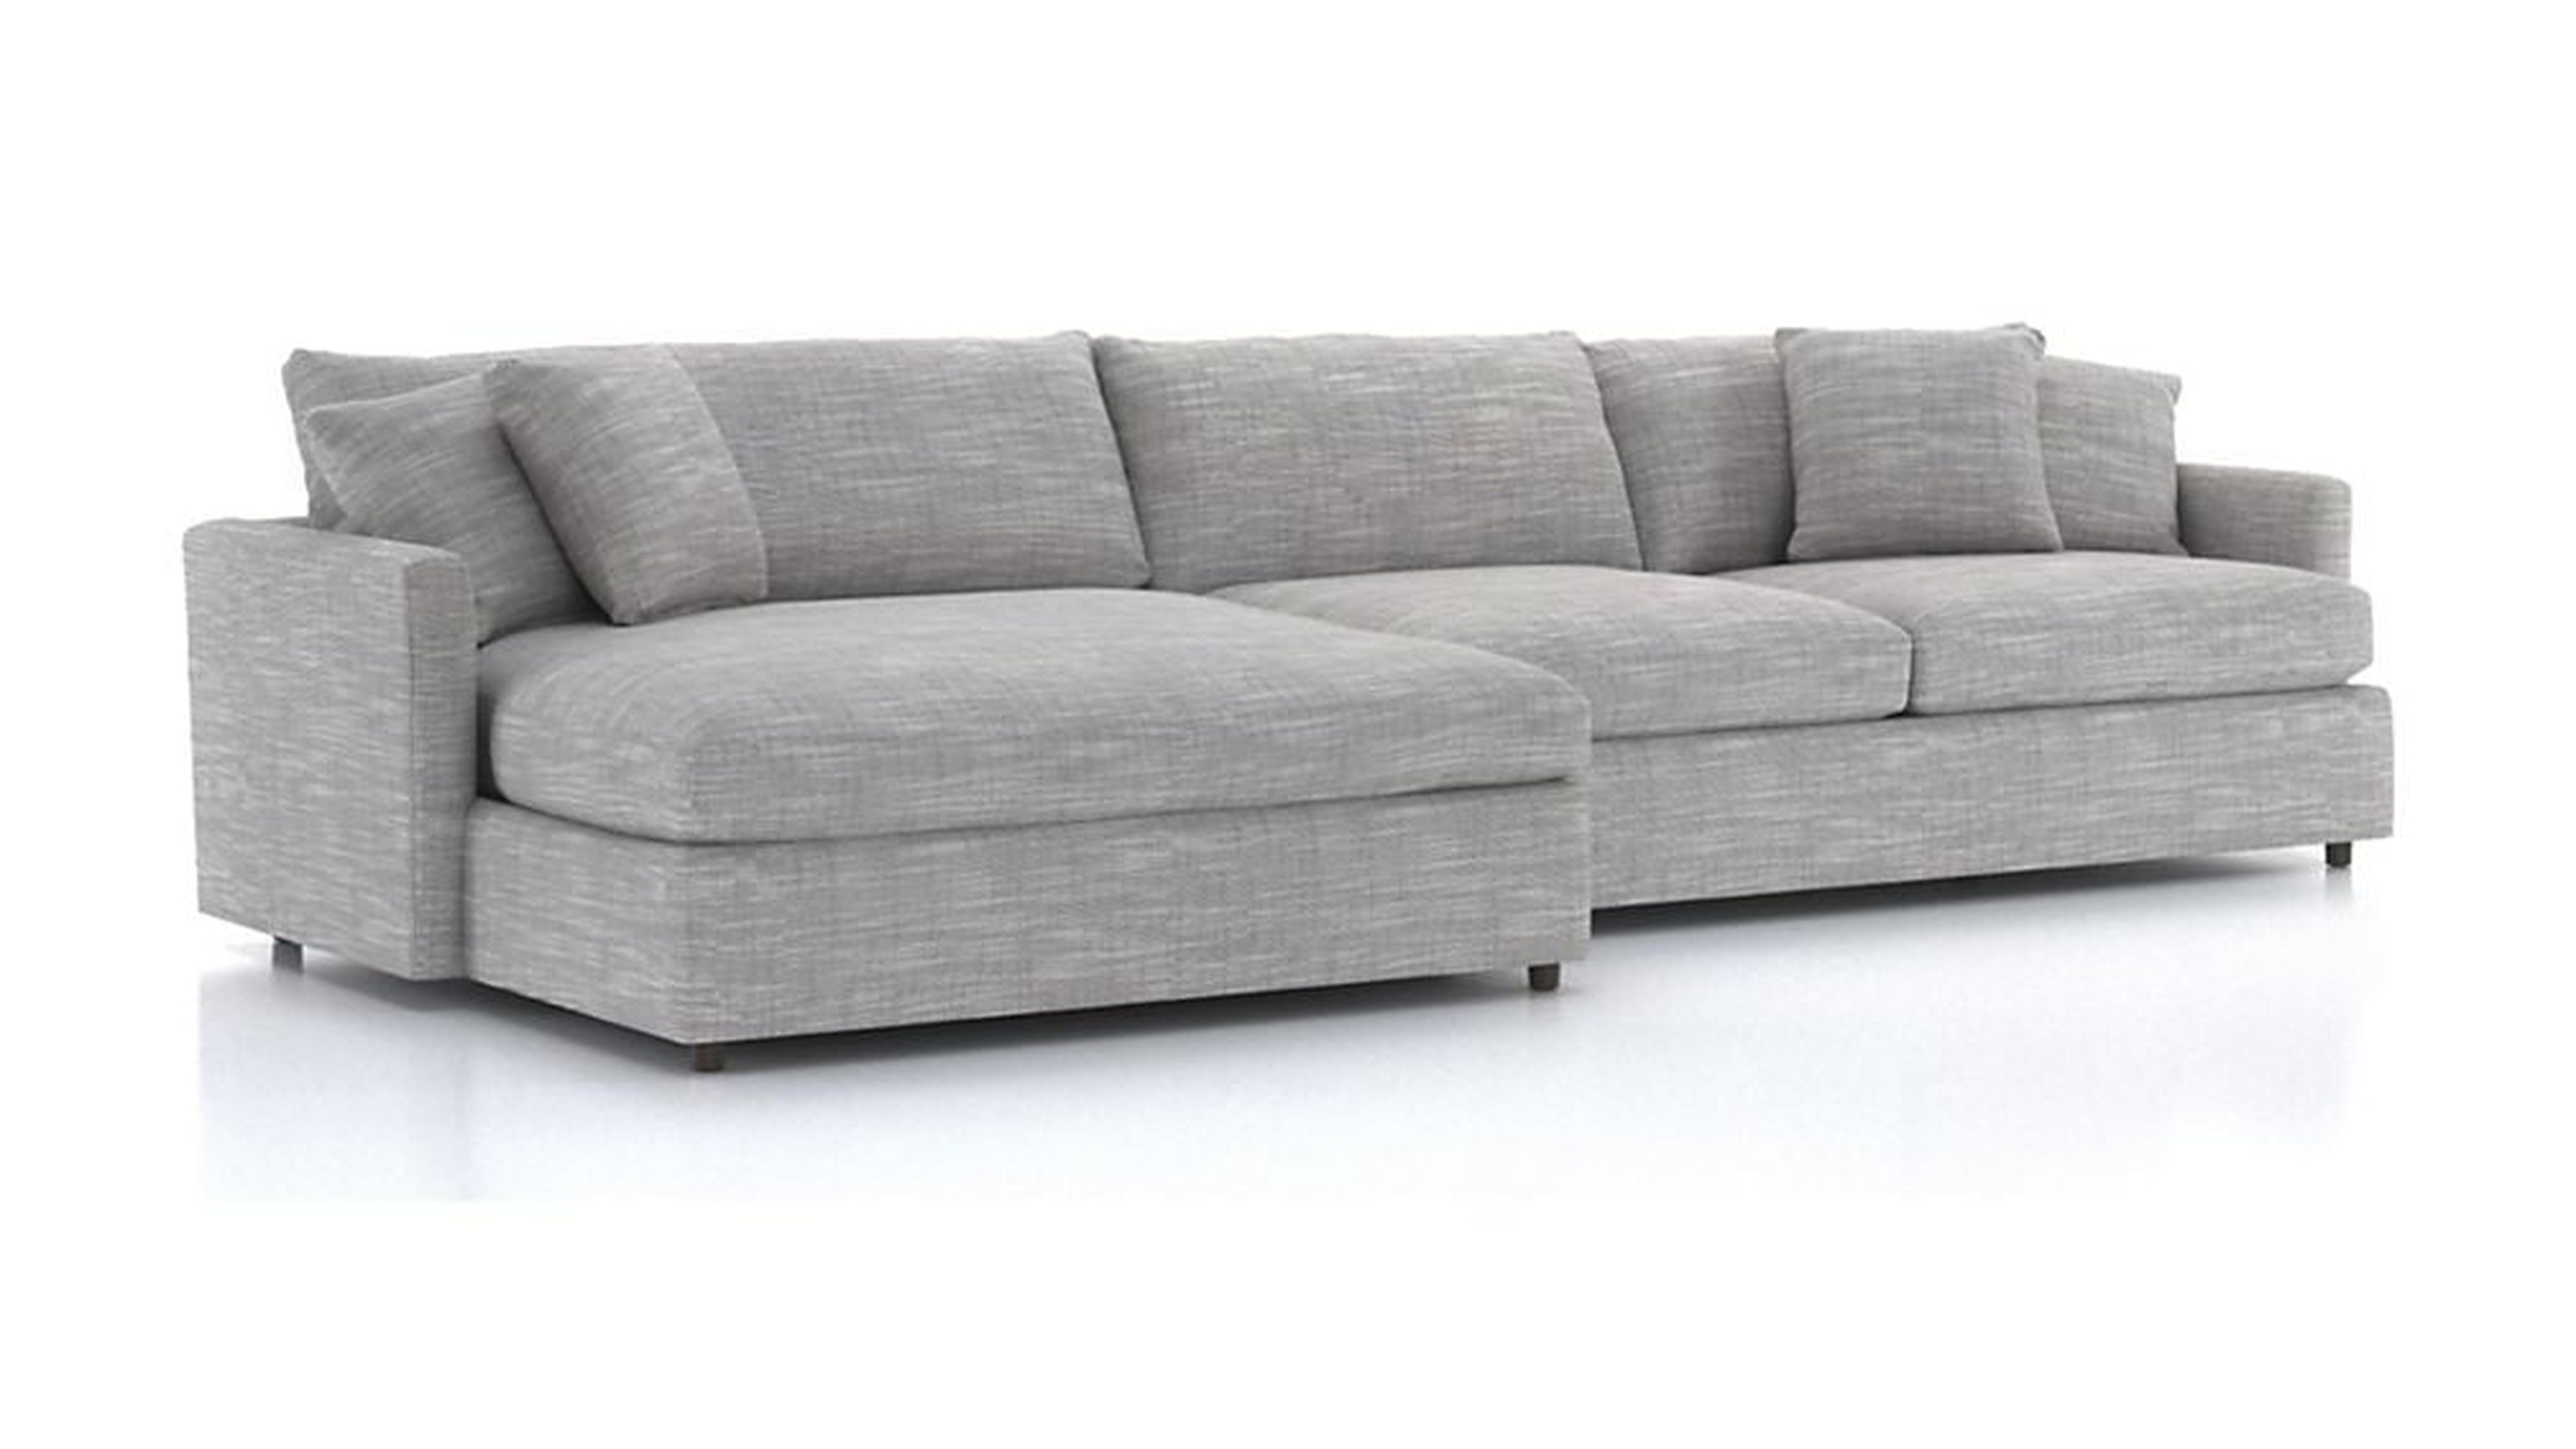 Lounge Deep 2-Piece Left Arm Double Chaise Sectional Sofa - Crate and Barrel